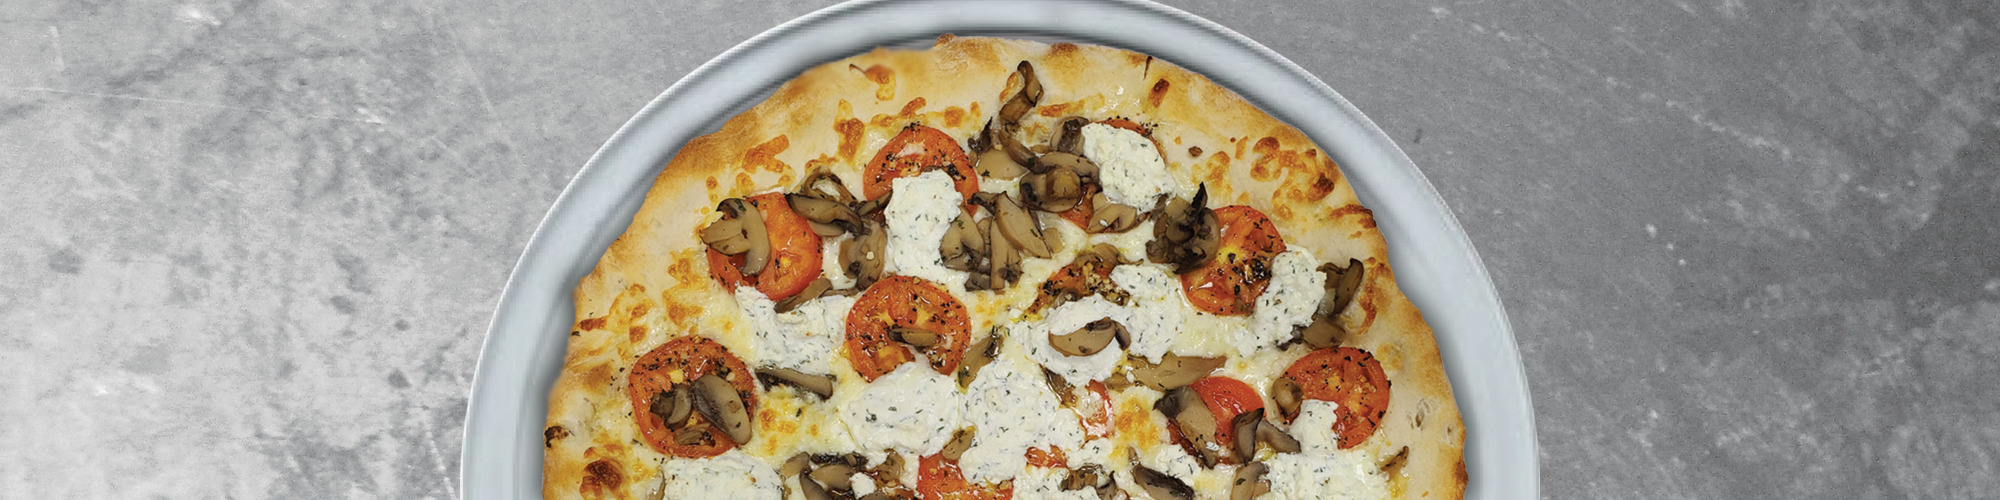 A delicious specialty pizza with feta cheese mushrooms and tomatoes